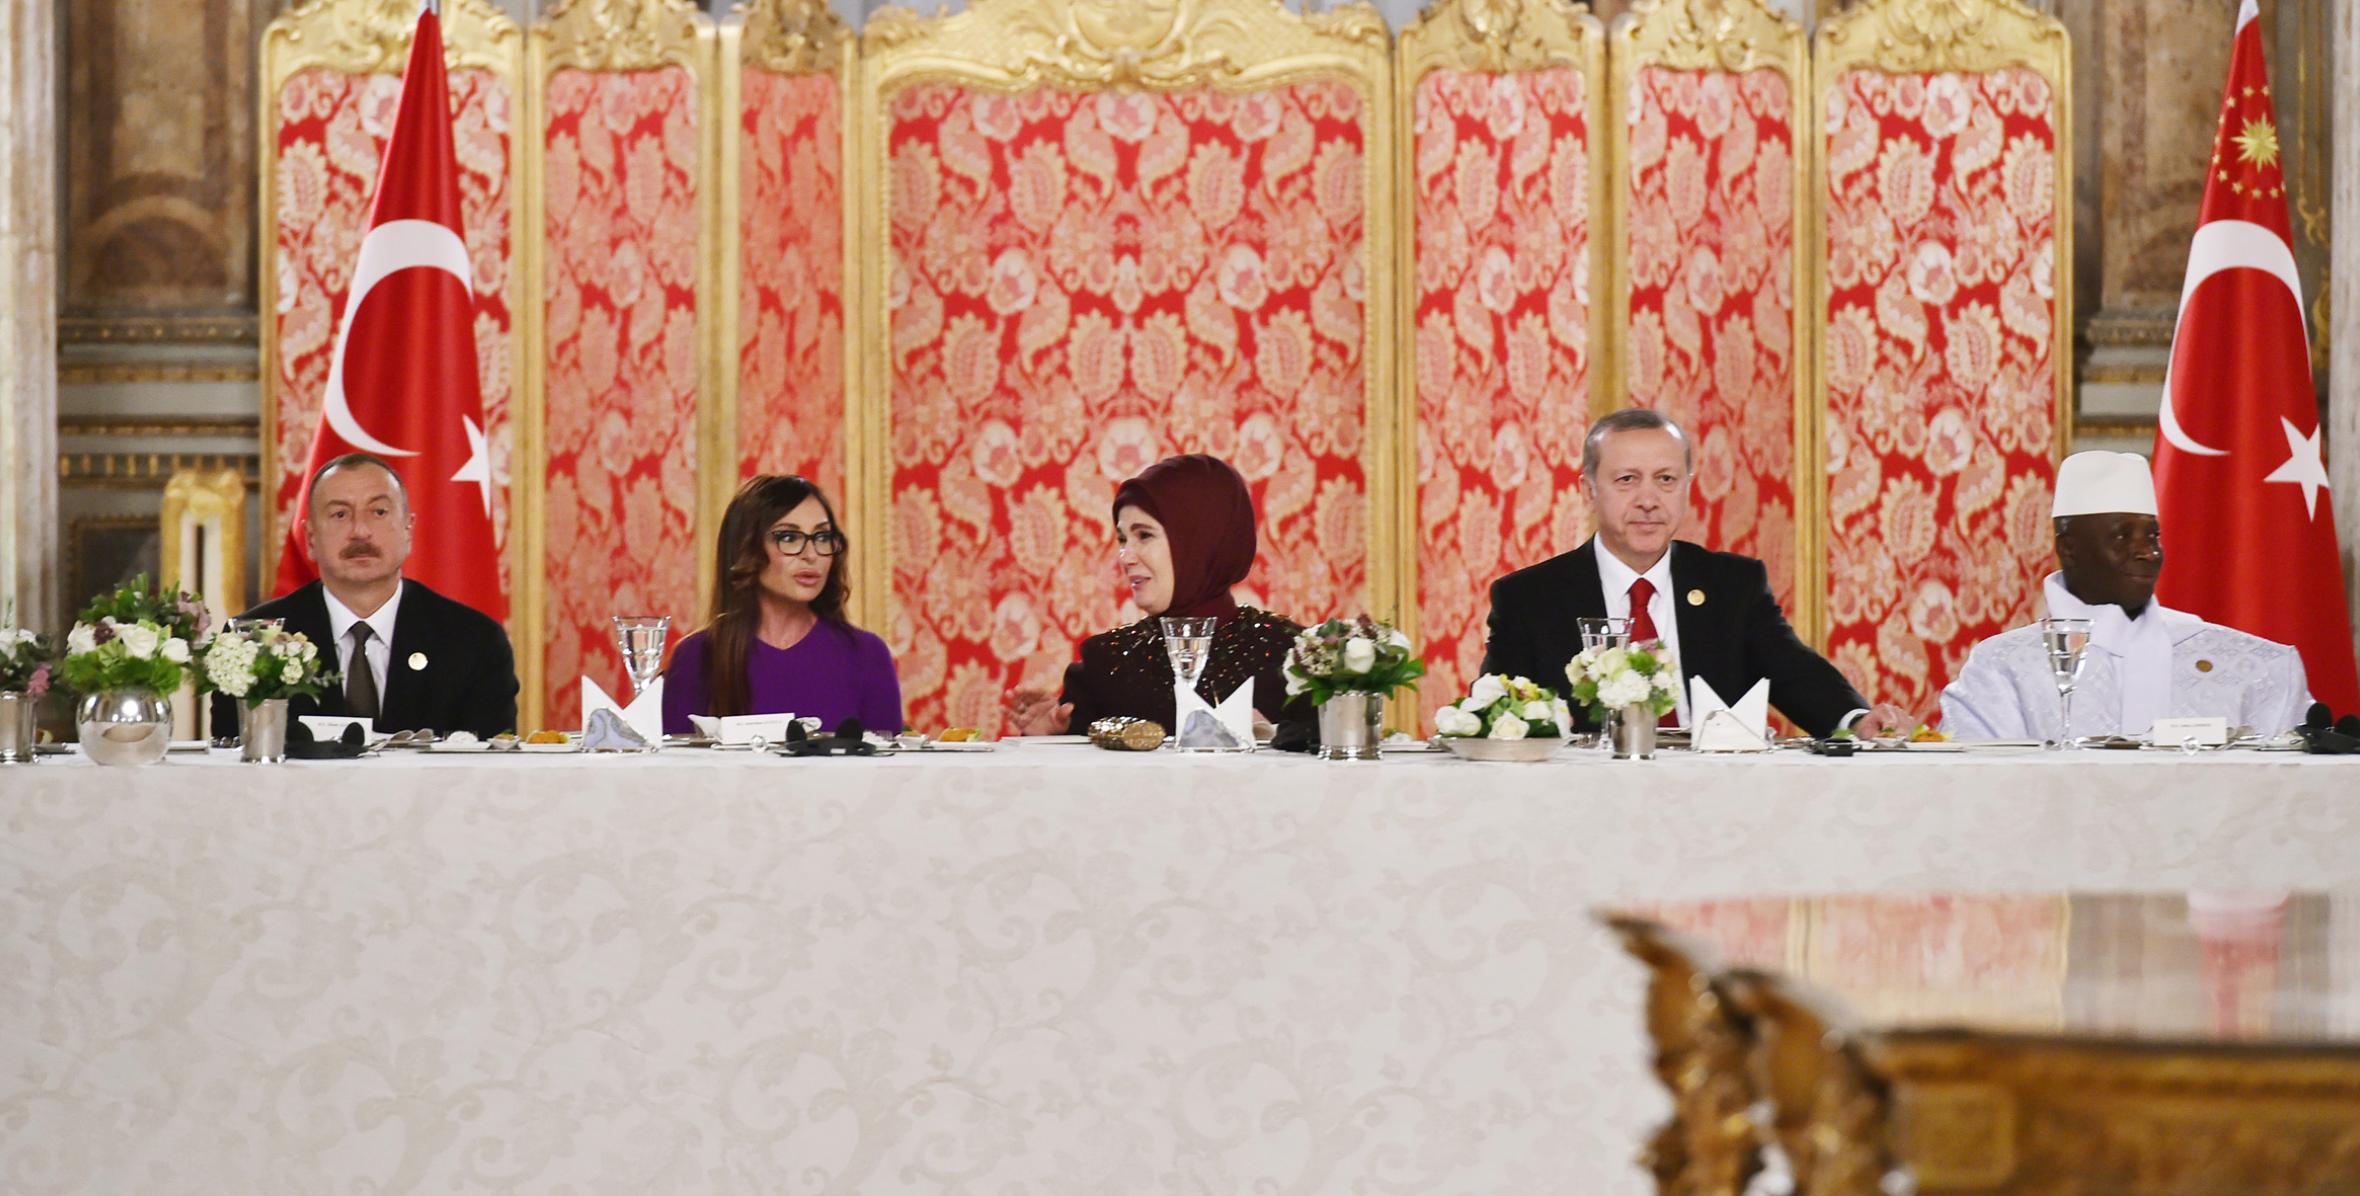 Reception was hosted in honor of heads of state and government